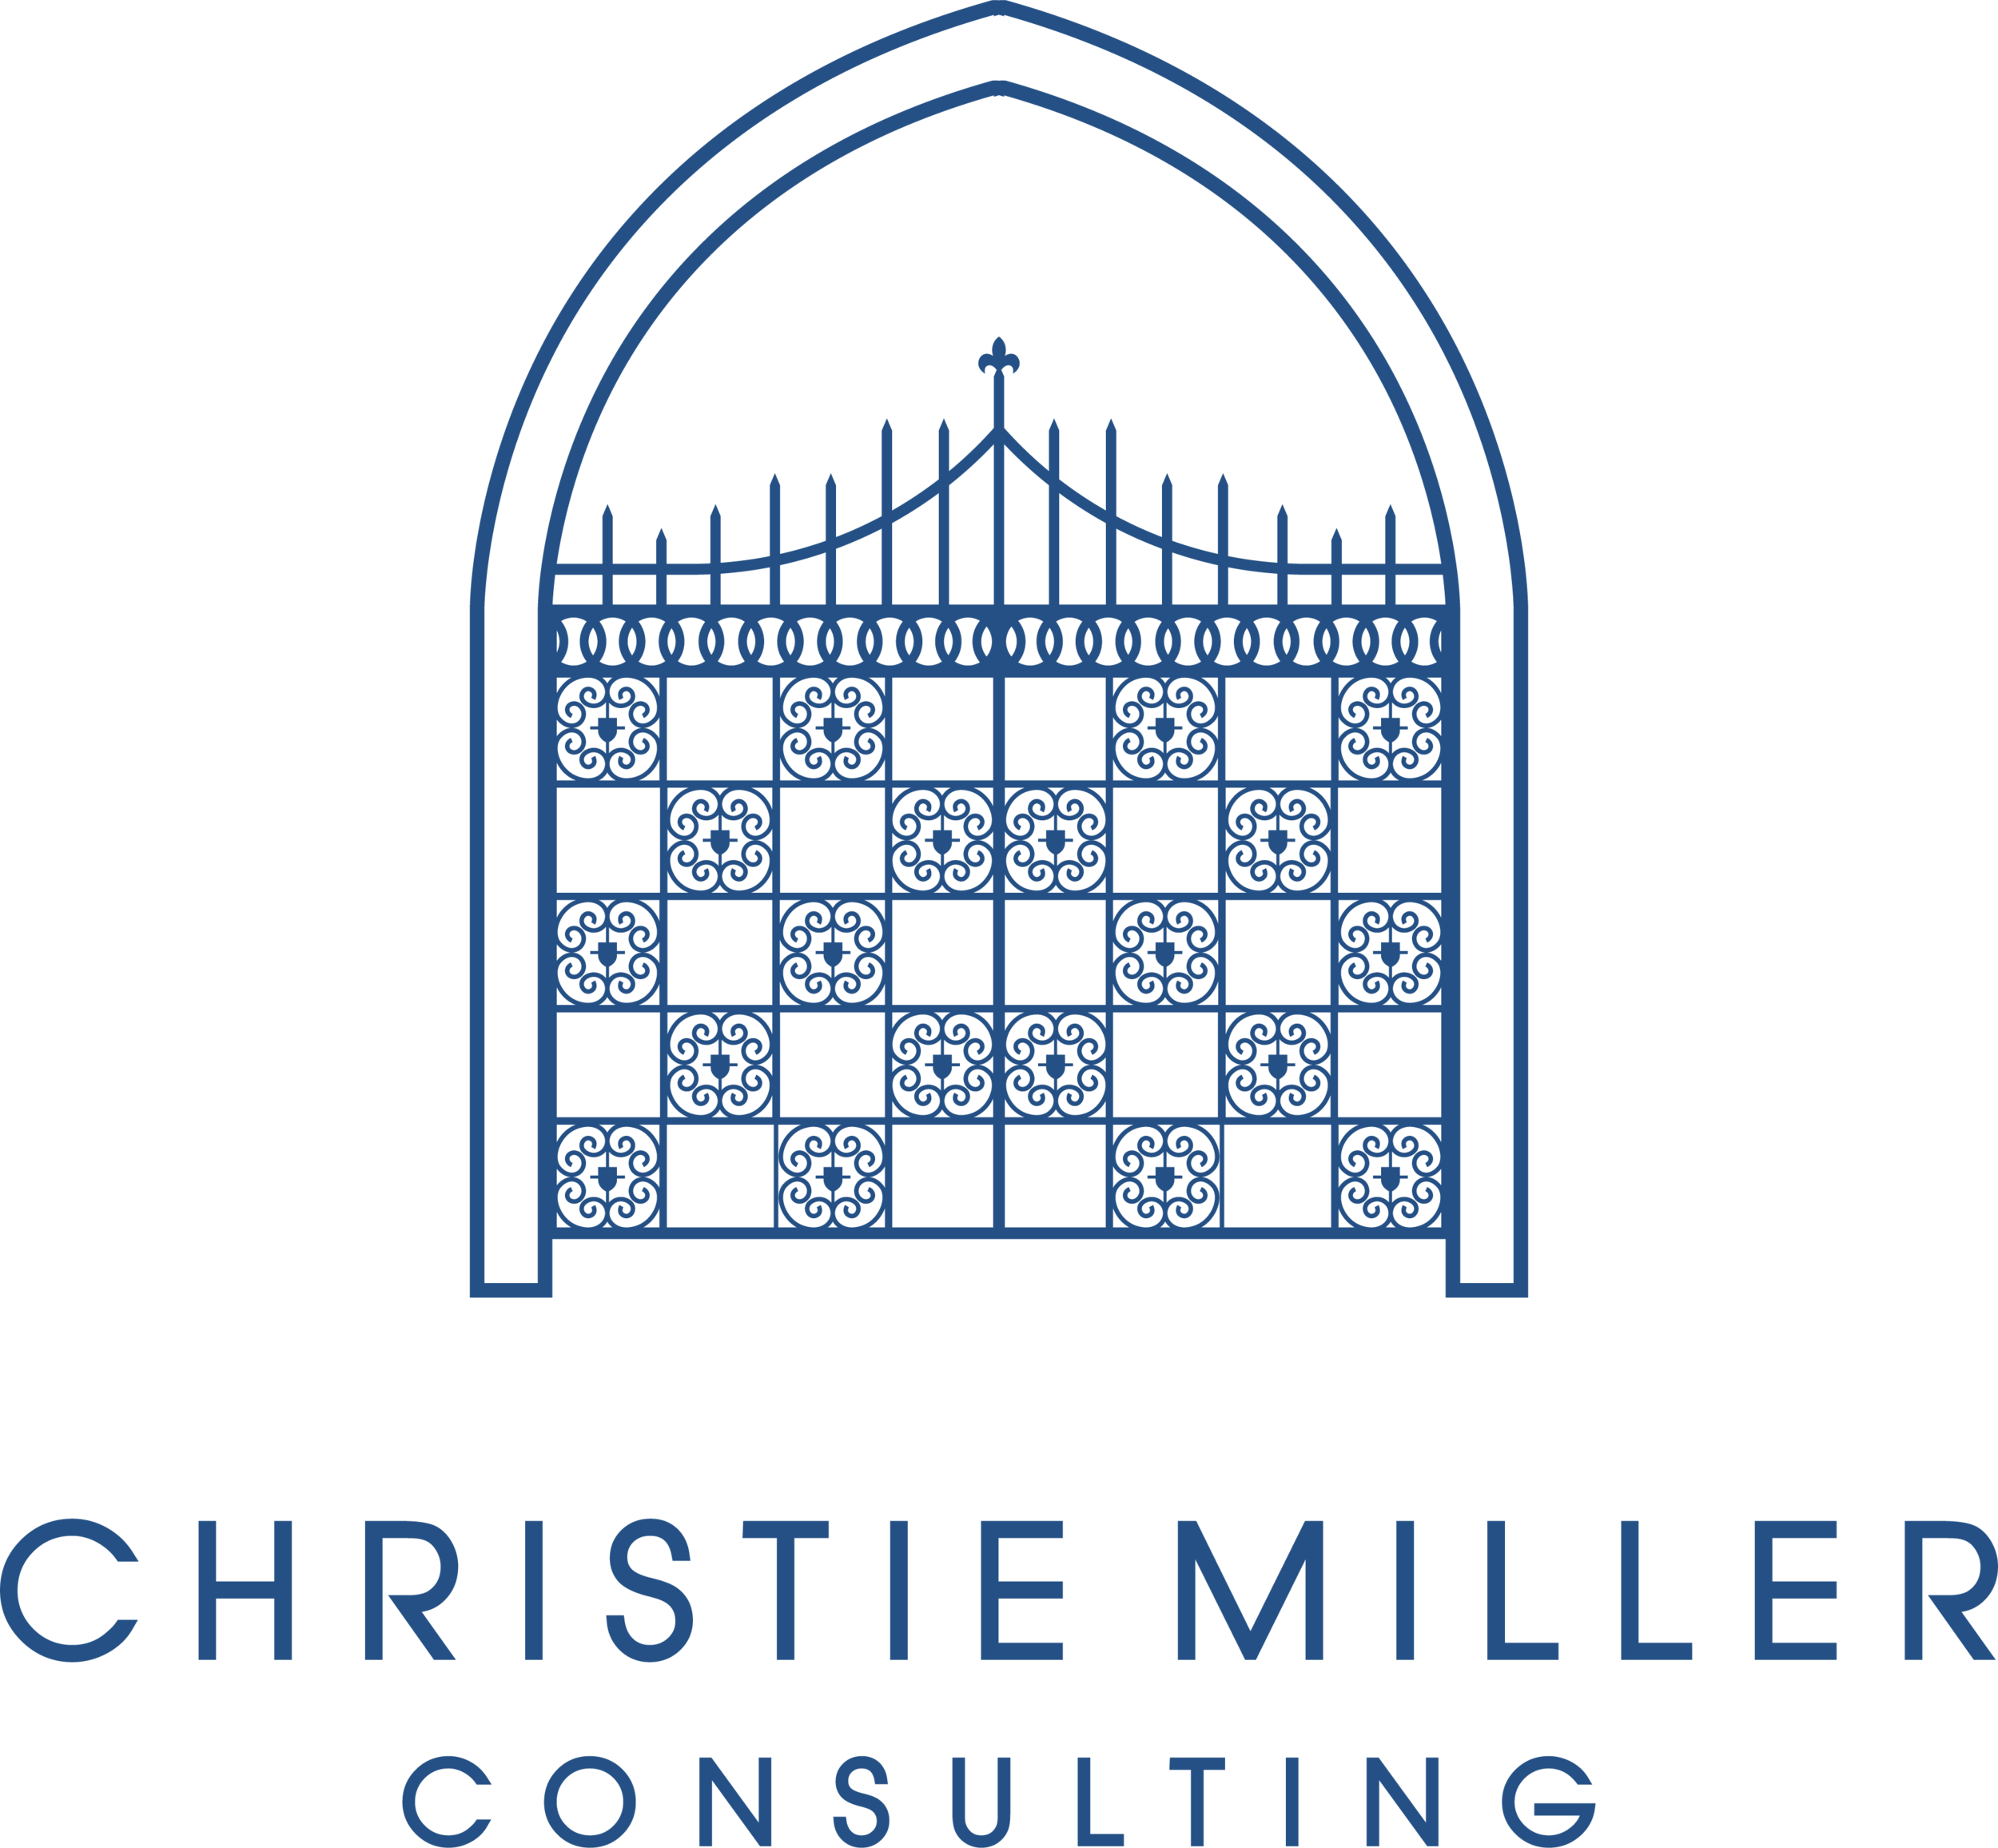 CHRISTIE MILLER CONSULTING